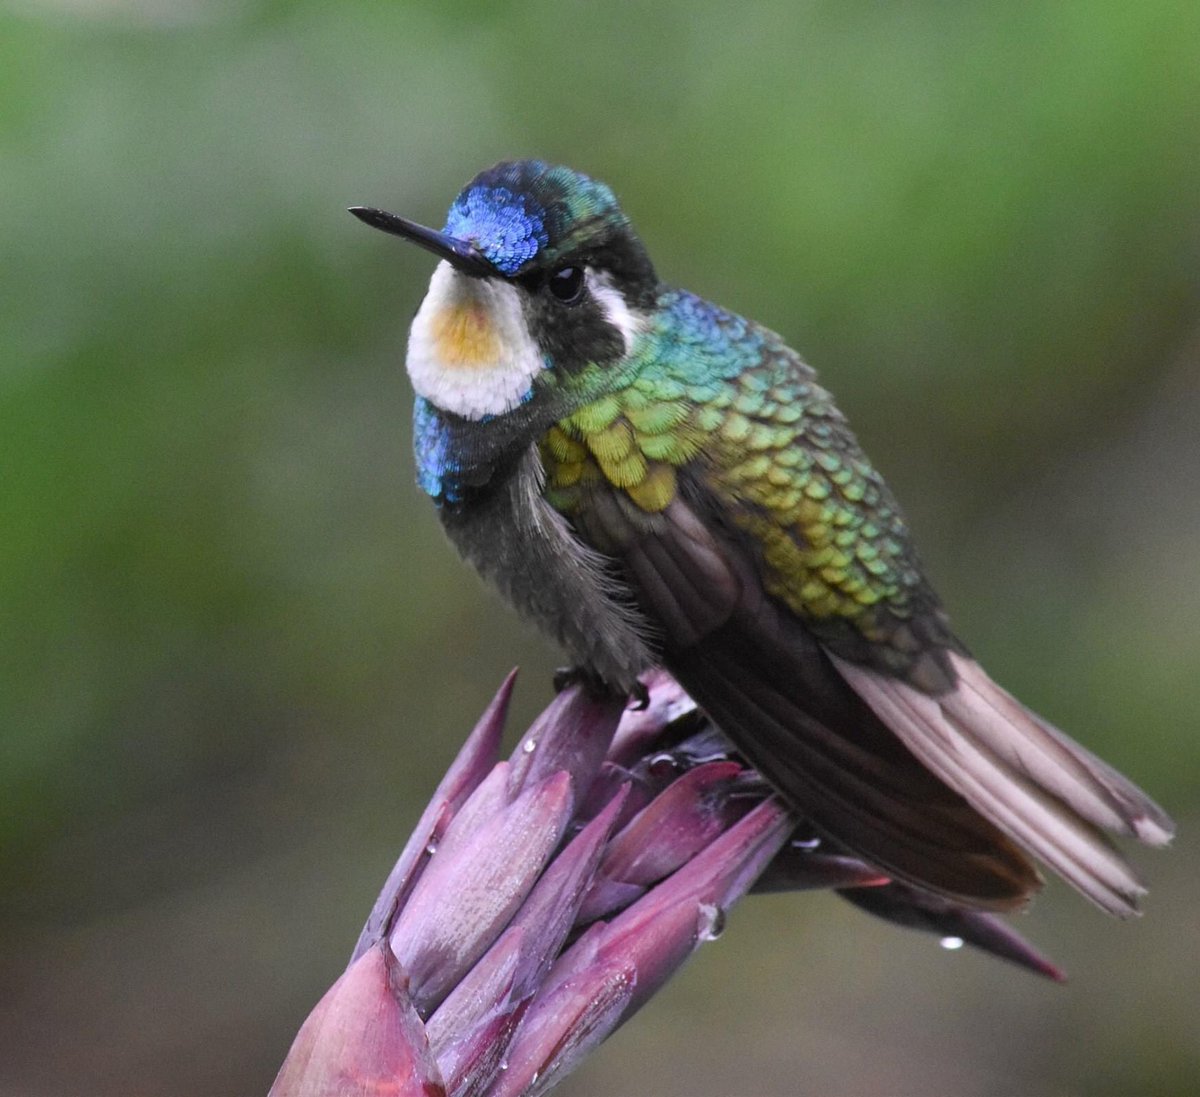 Here are some very nice birds I saw in Costa Rica to compliment your Saturday. Let’s start with the white-throated mountain gem which is know for producing involuntary chef-kiss gestures in those who see it.